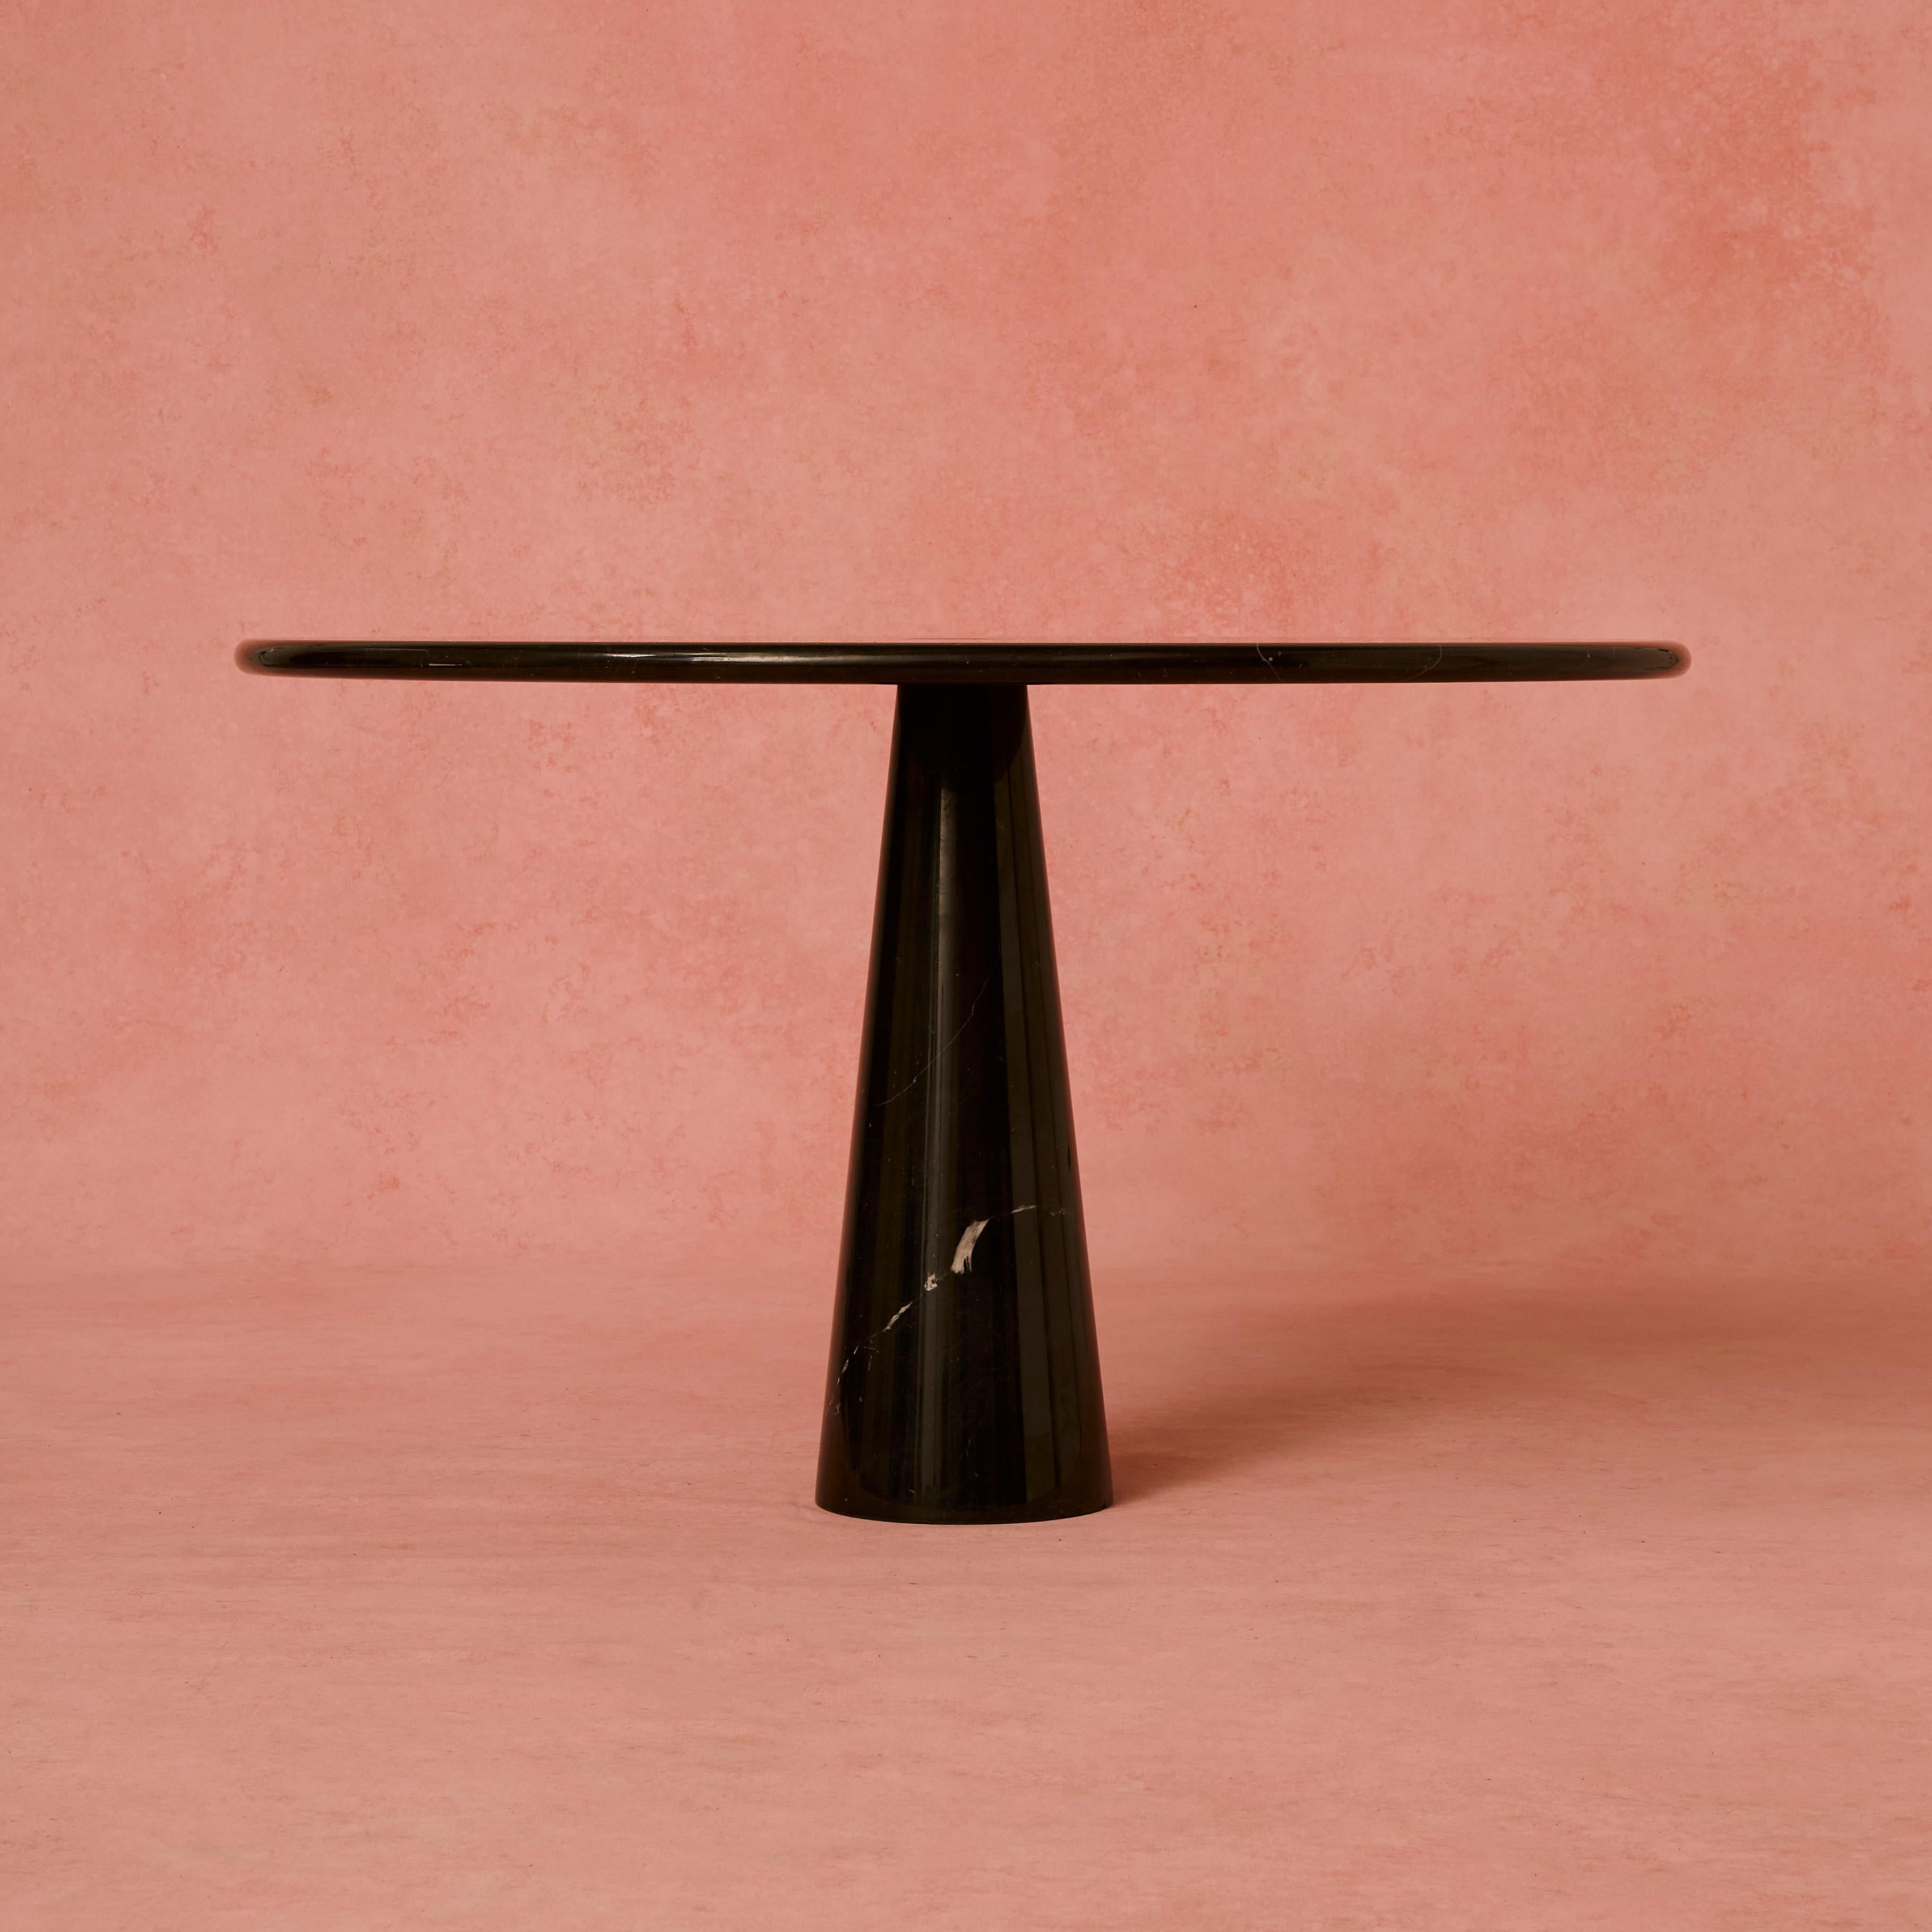 Black Marble ‘Eros’ dining table Designed by Angelo Mangiarotti, 1971. The table is made from black marble with white veins running through with a conical post coming through centre of circular round top. Part of the Eros series for Skipper, Italy.